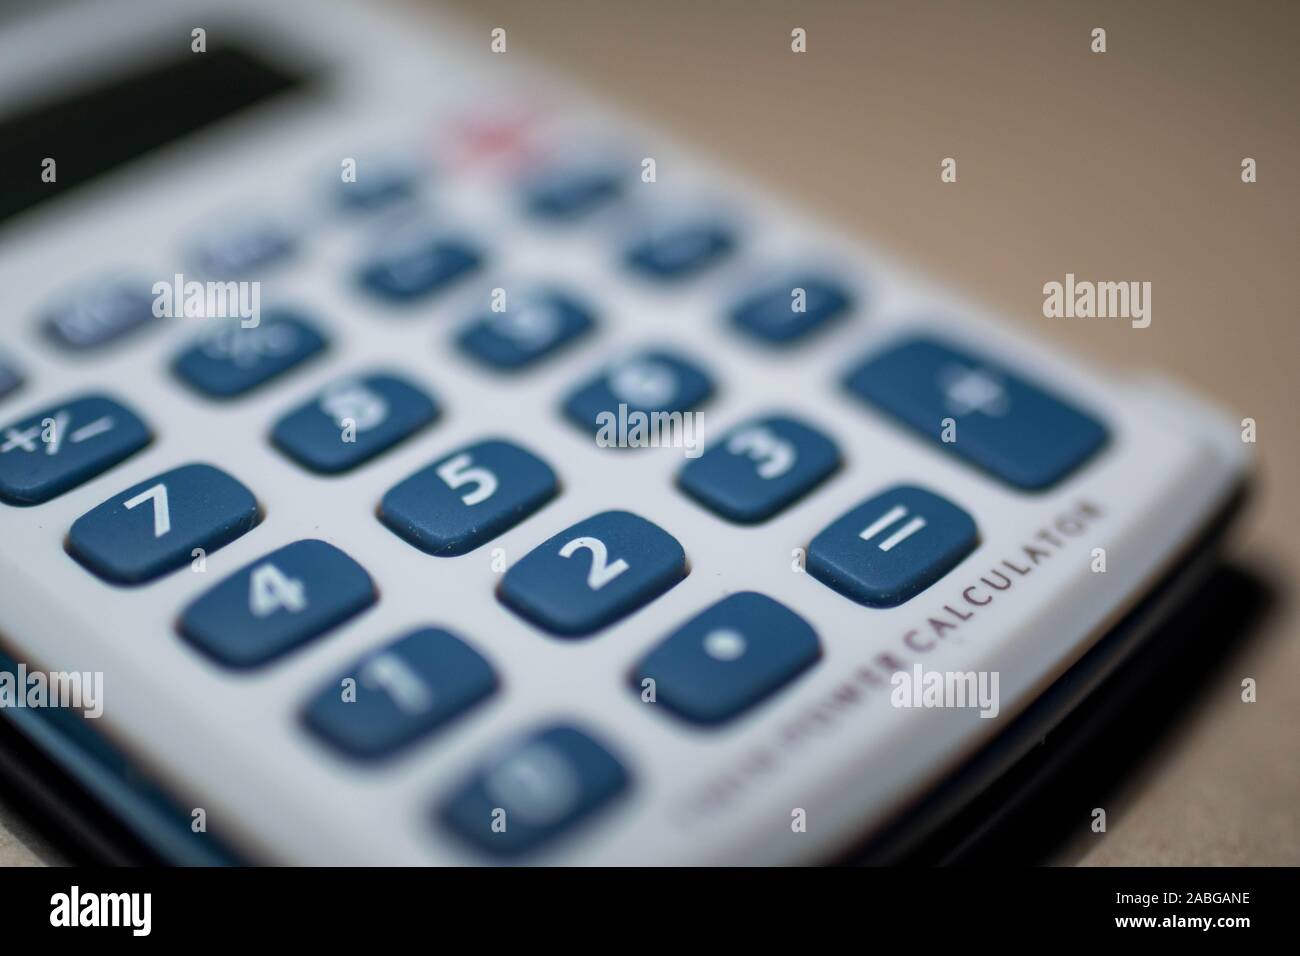 calculator with blue keys on white background Stock Photo